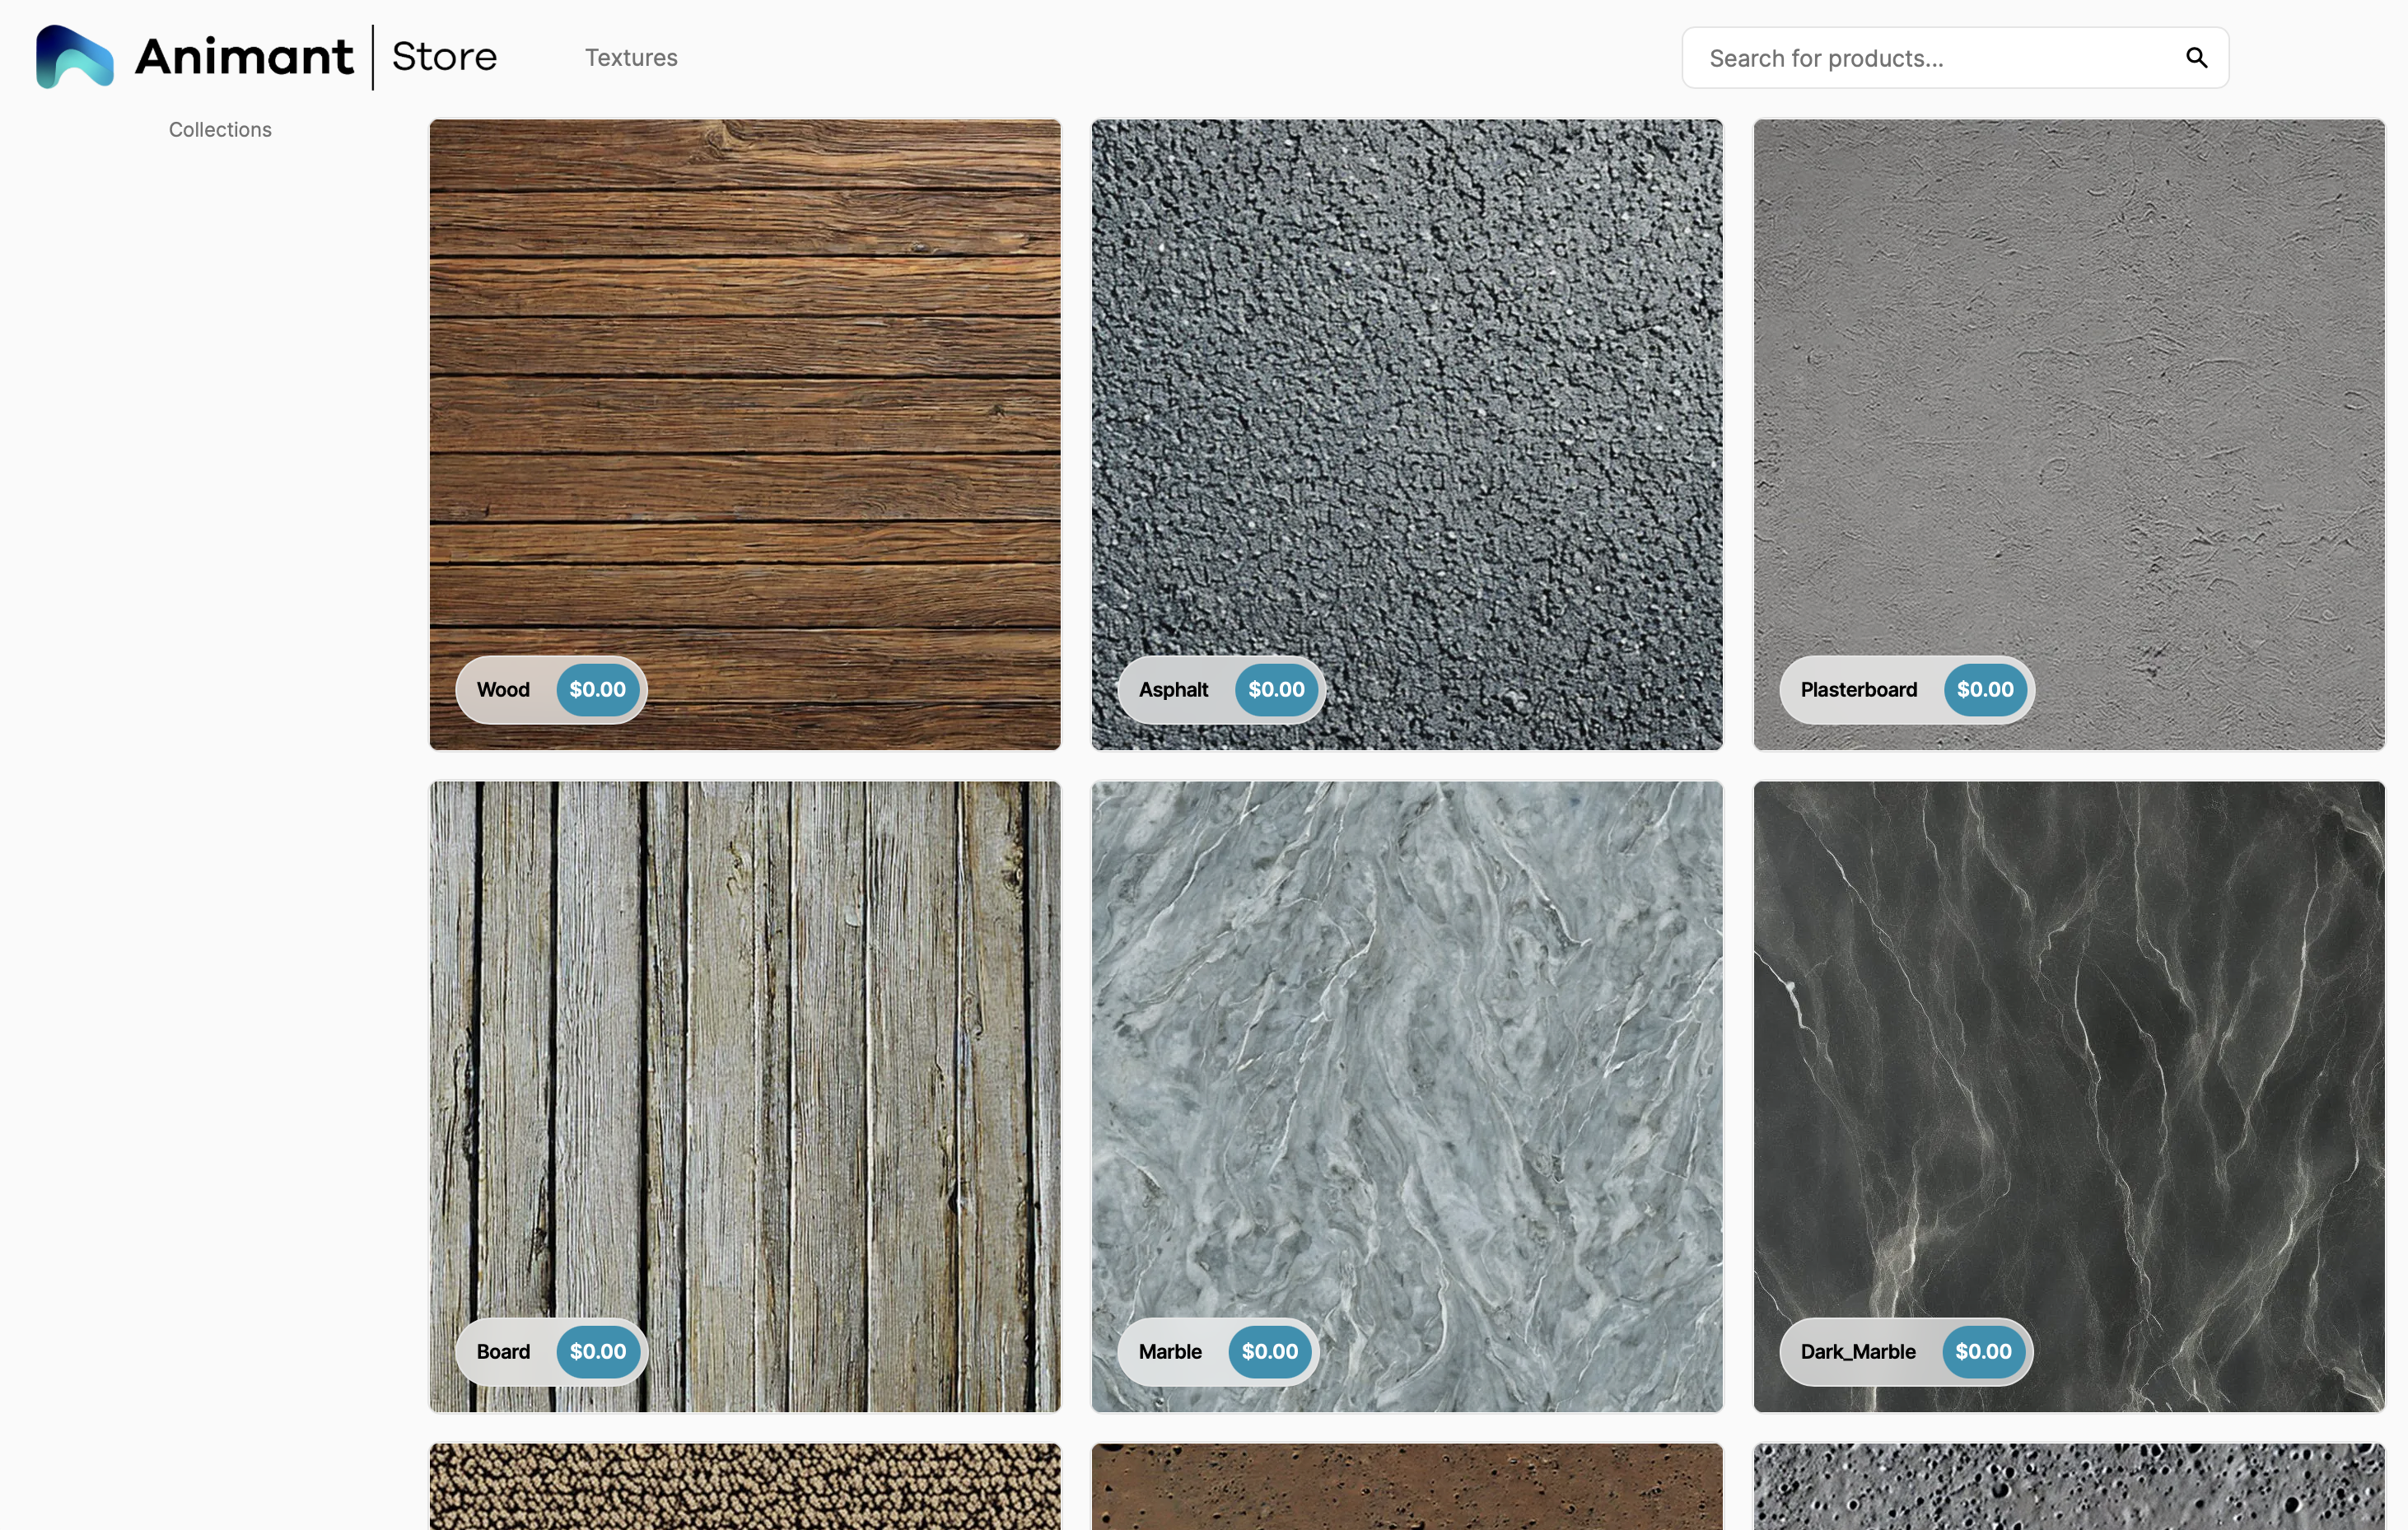 The Animant Store, showing a gallery of Textures available for download.